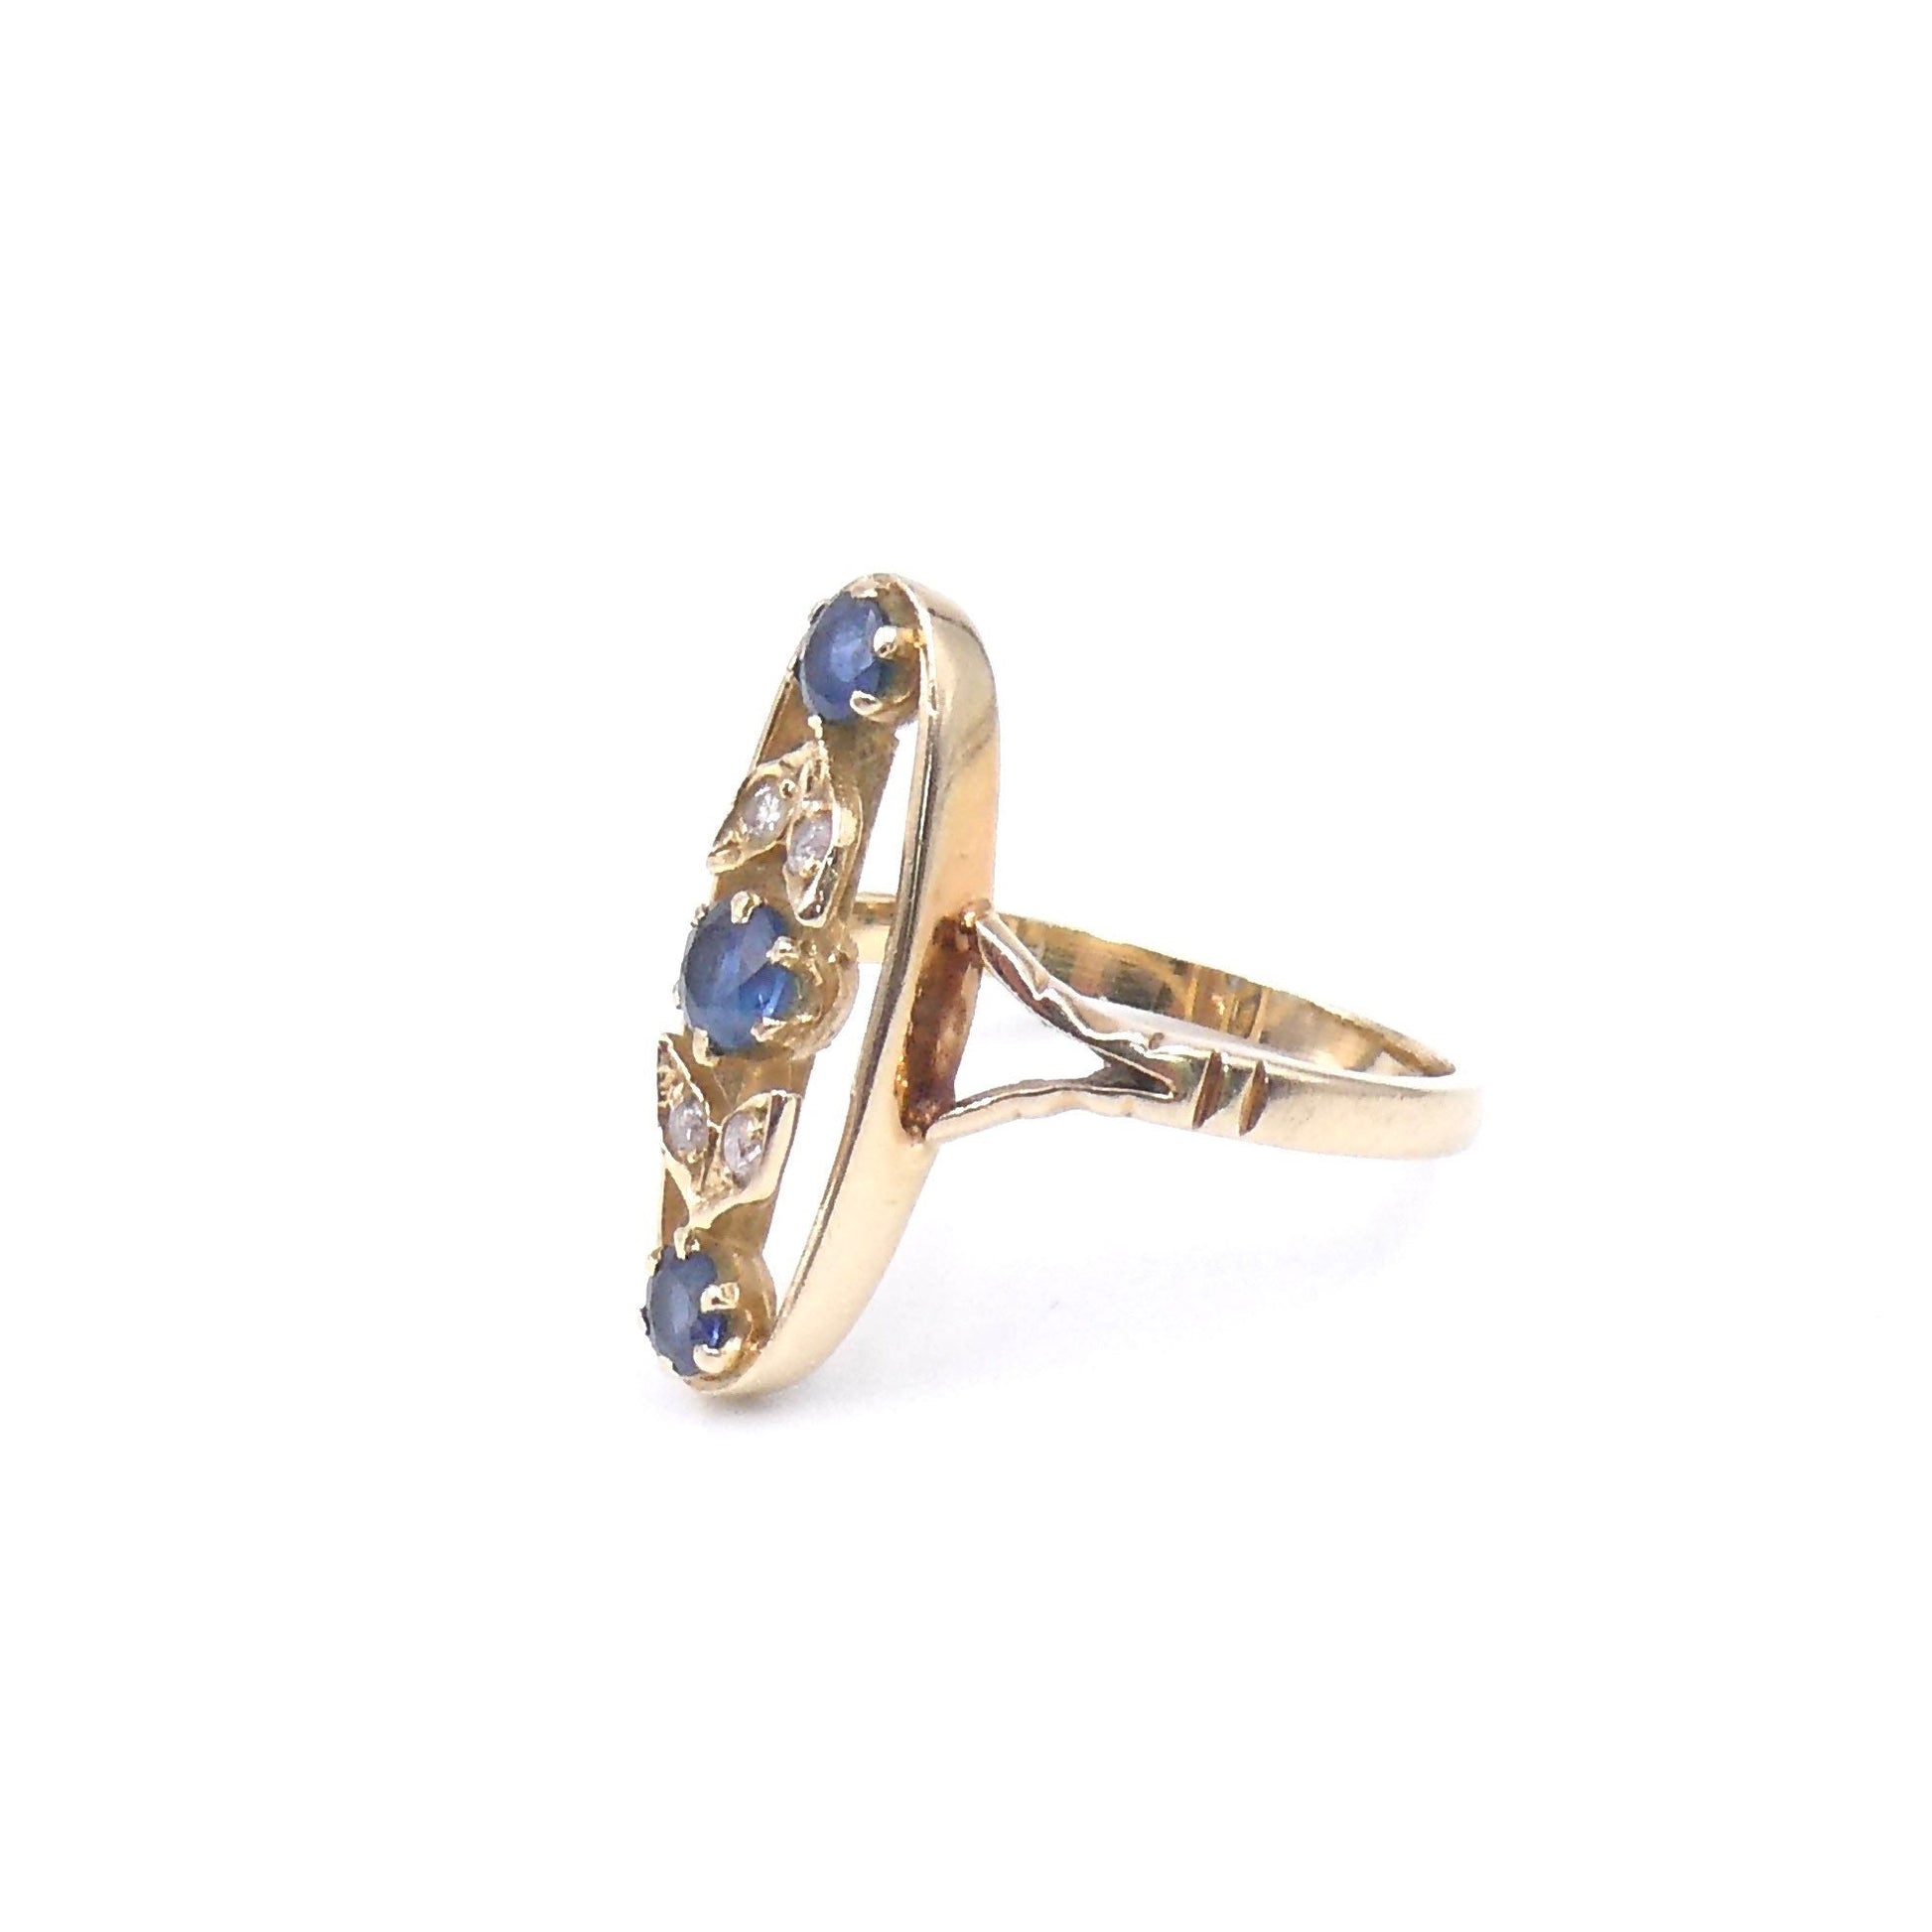 Sapphire diamond navette shaped ring, sapphire ring with diamond set leaf motifs. - Collected